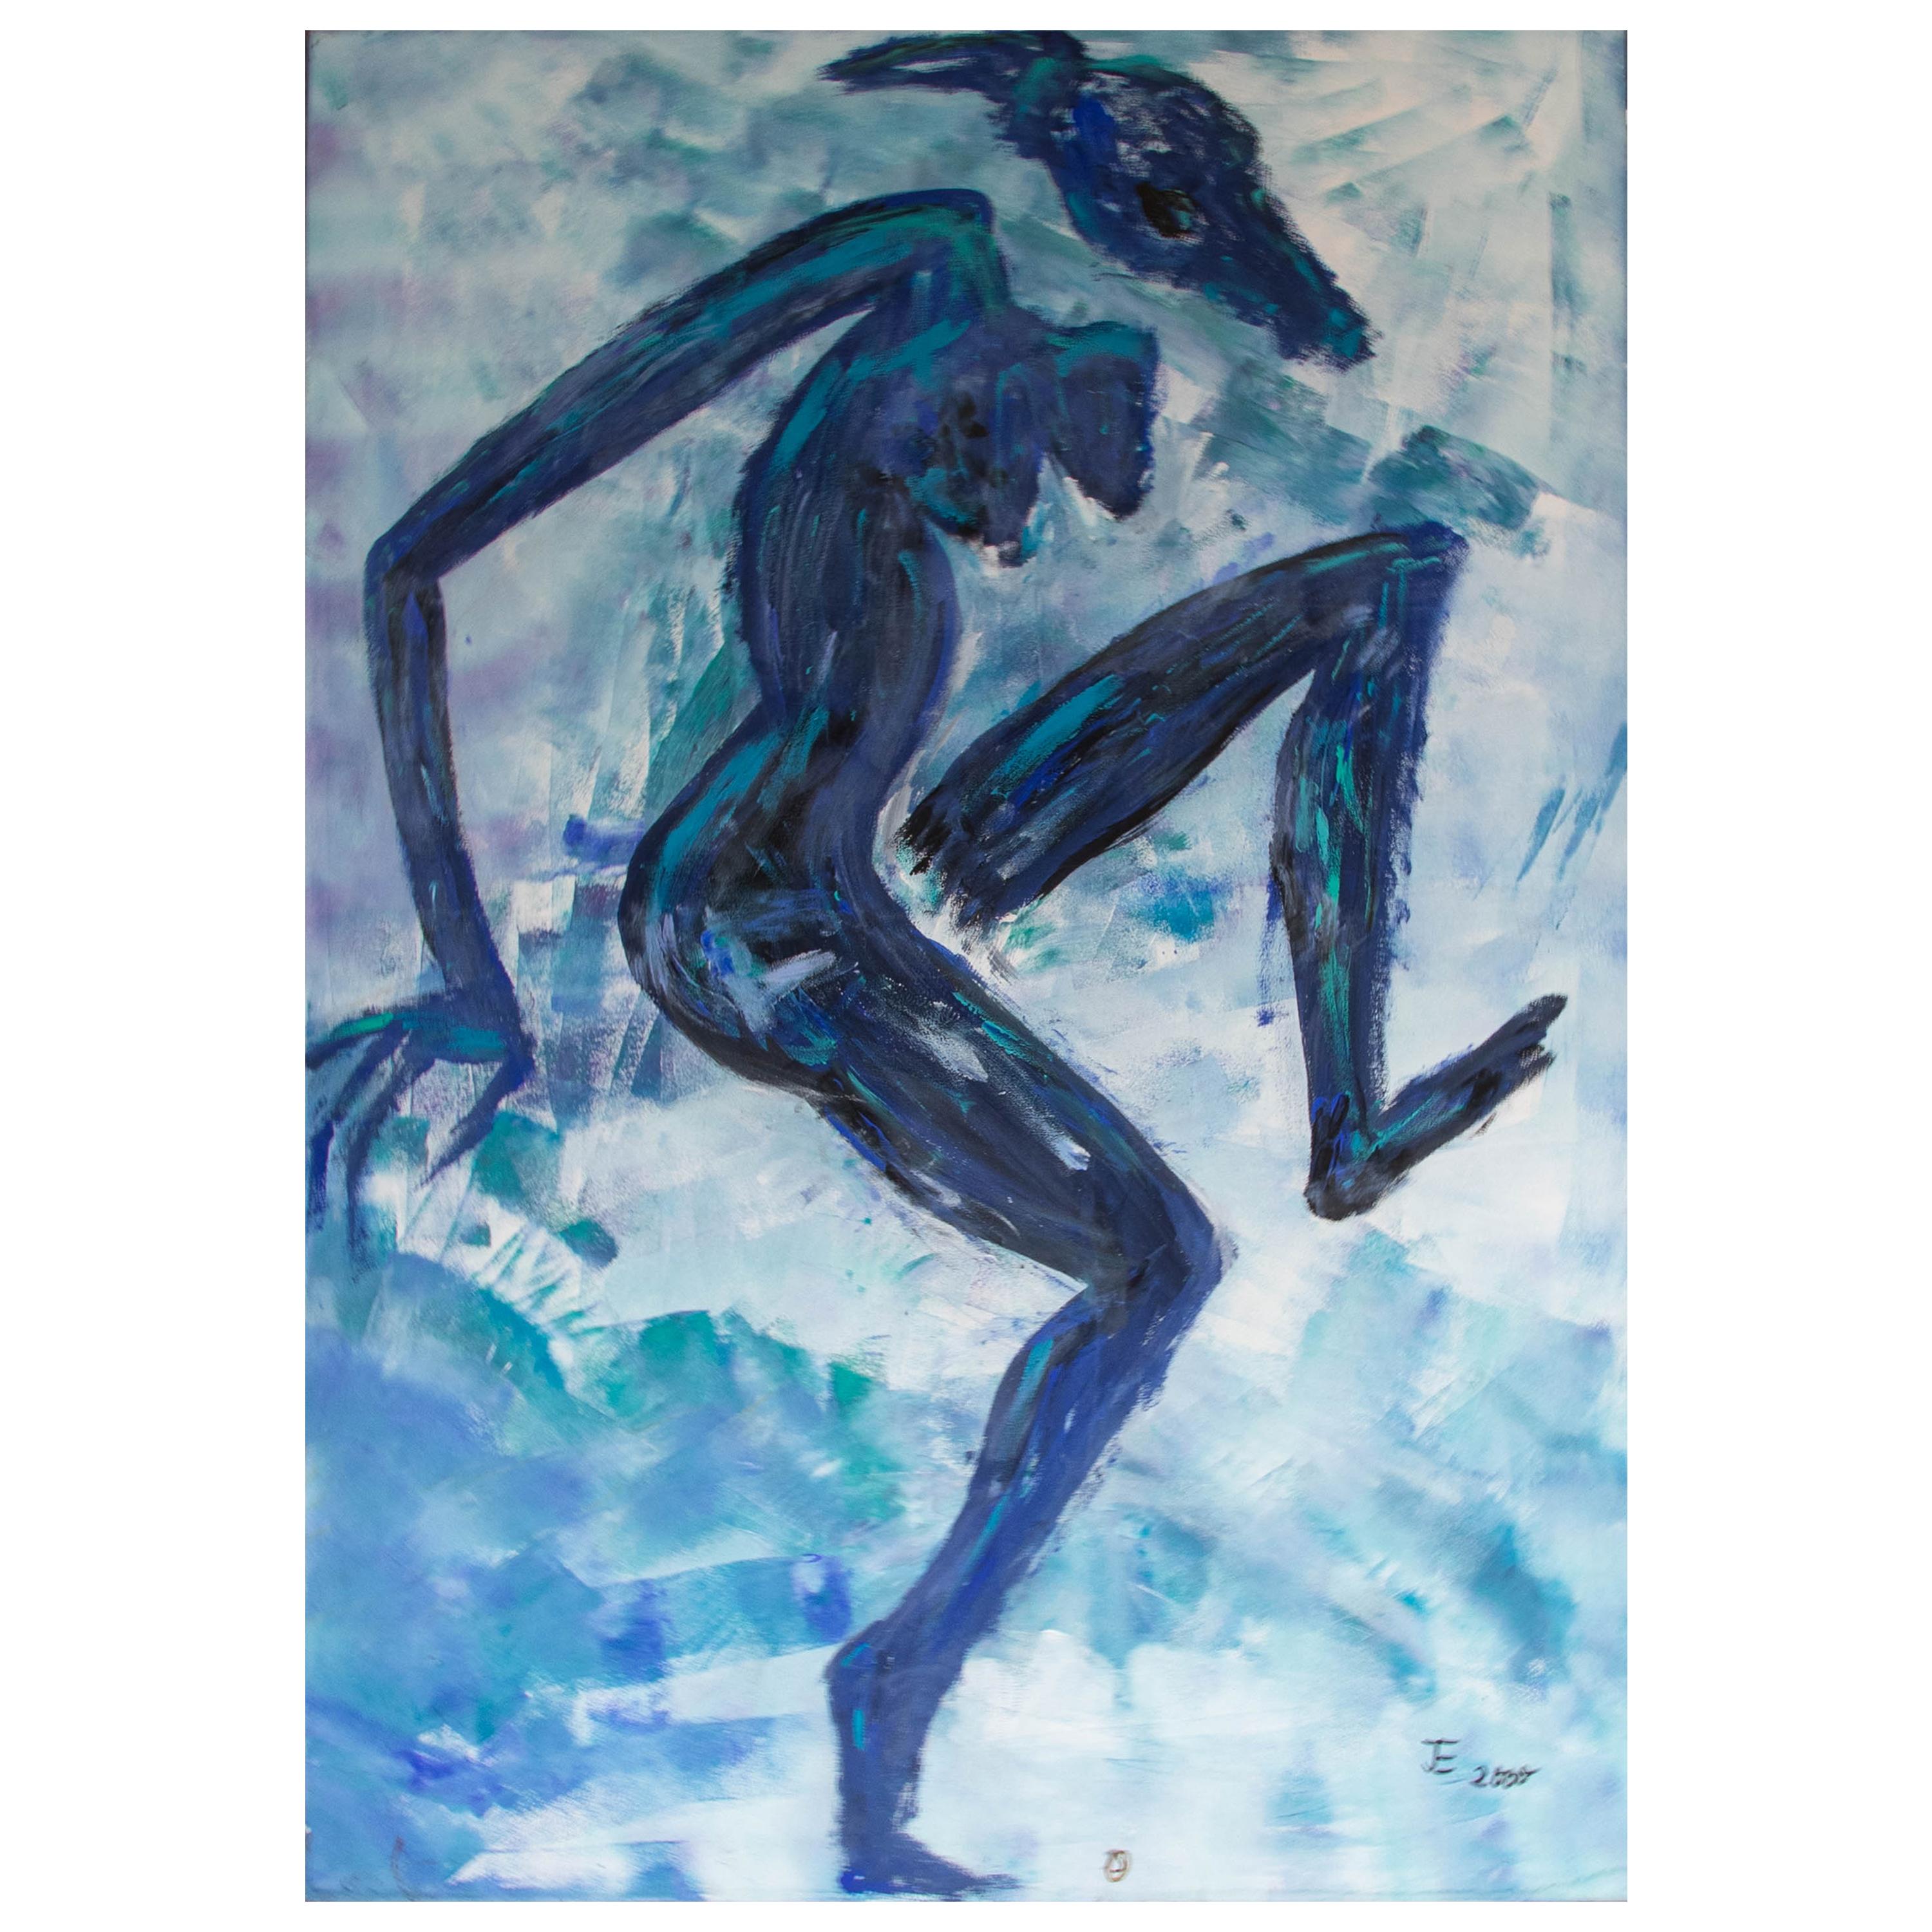 Ingrid Stolzenberg 'Female Chimera' German Post Expressionism Painting For Sale